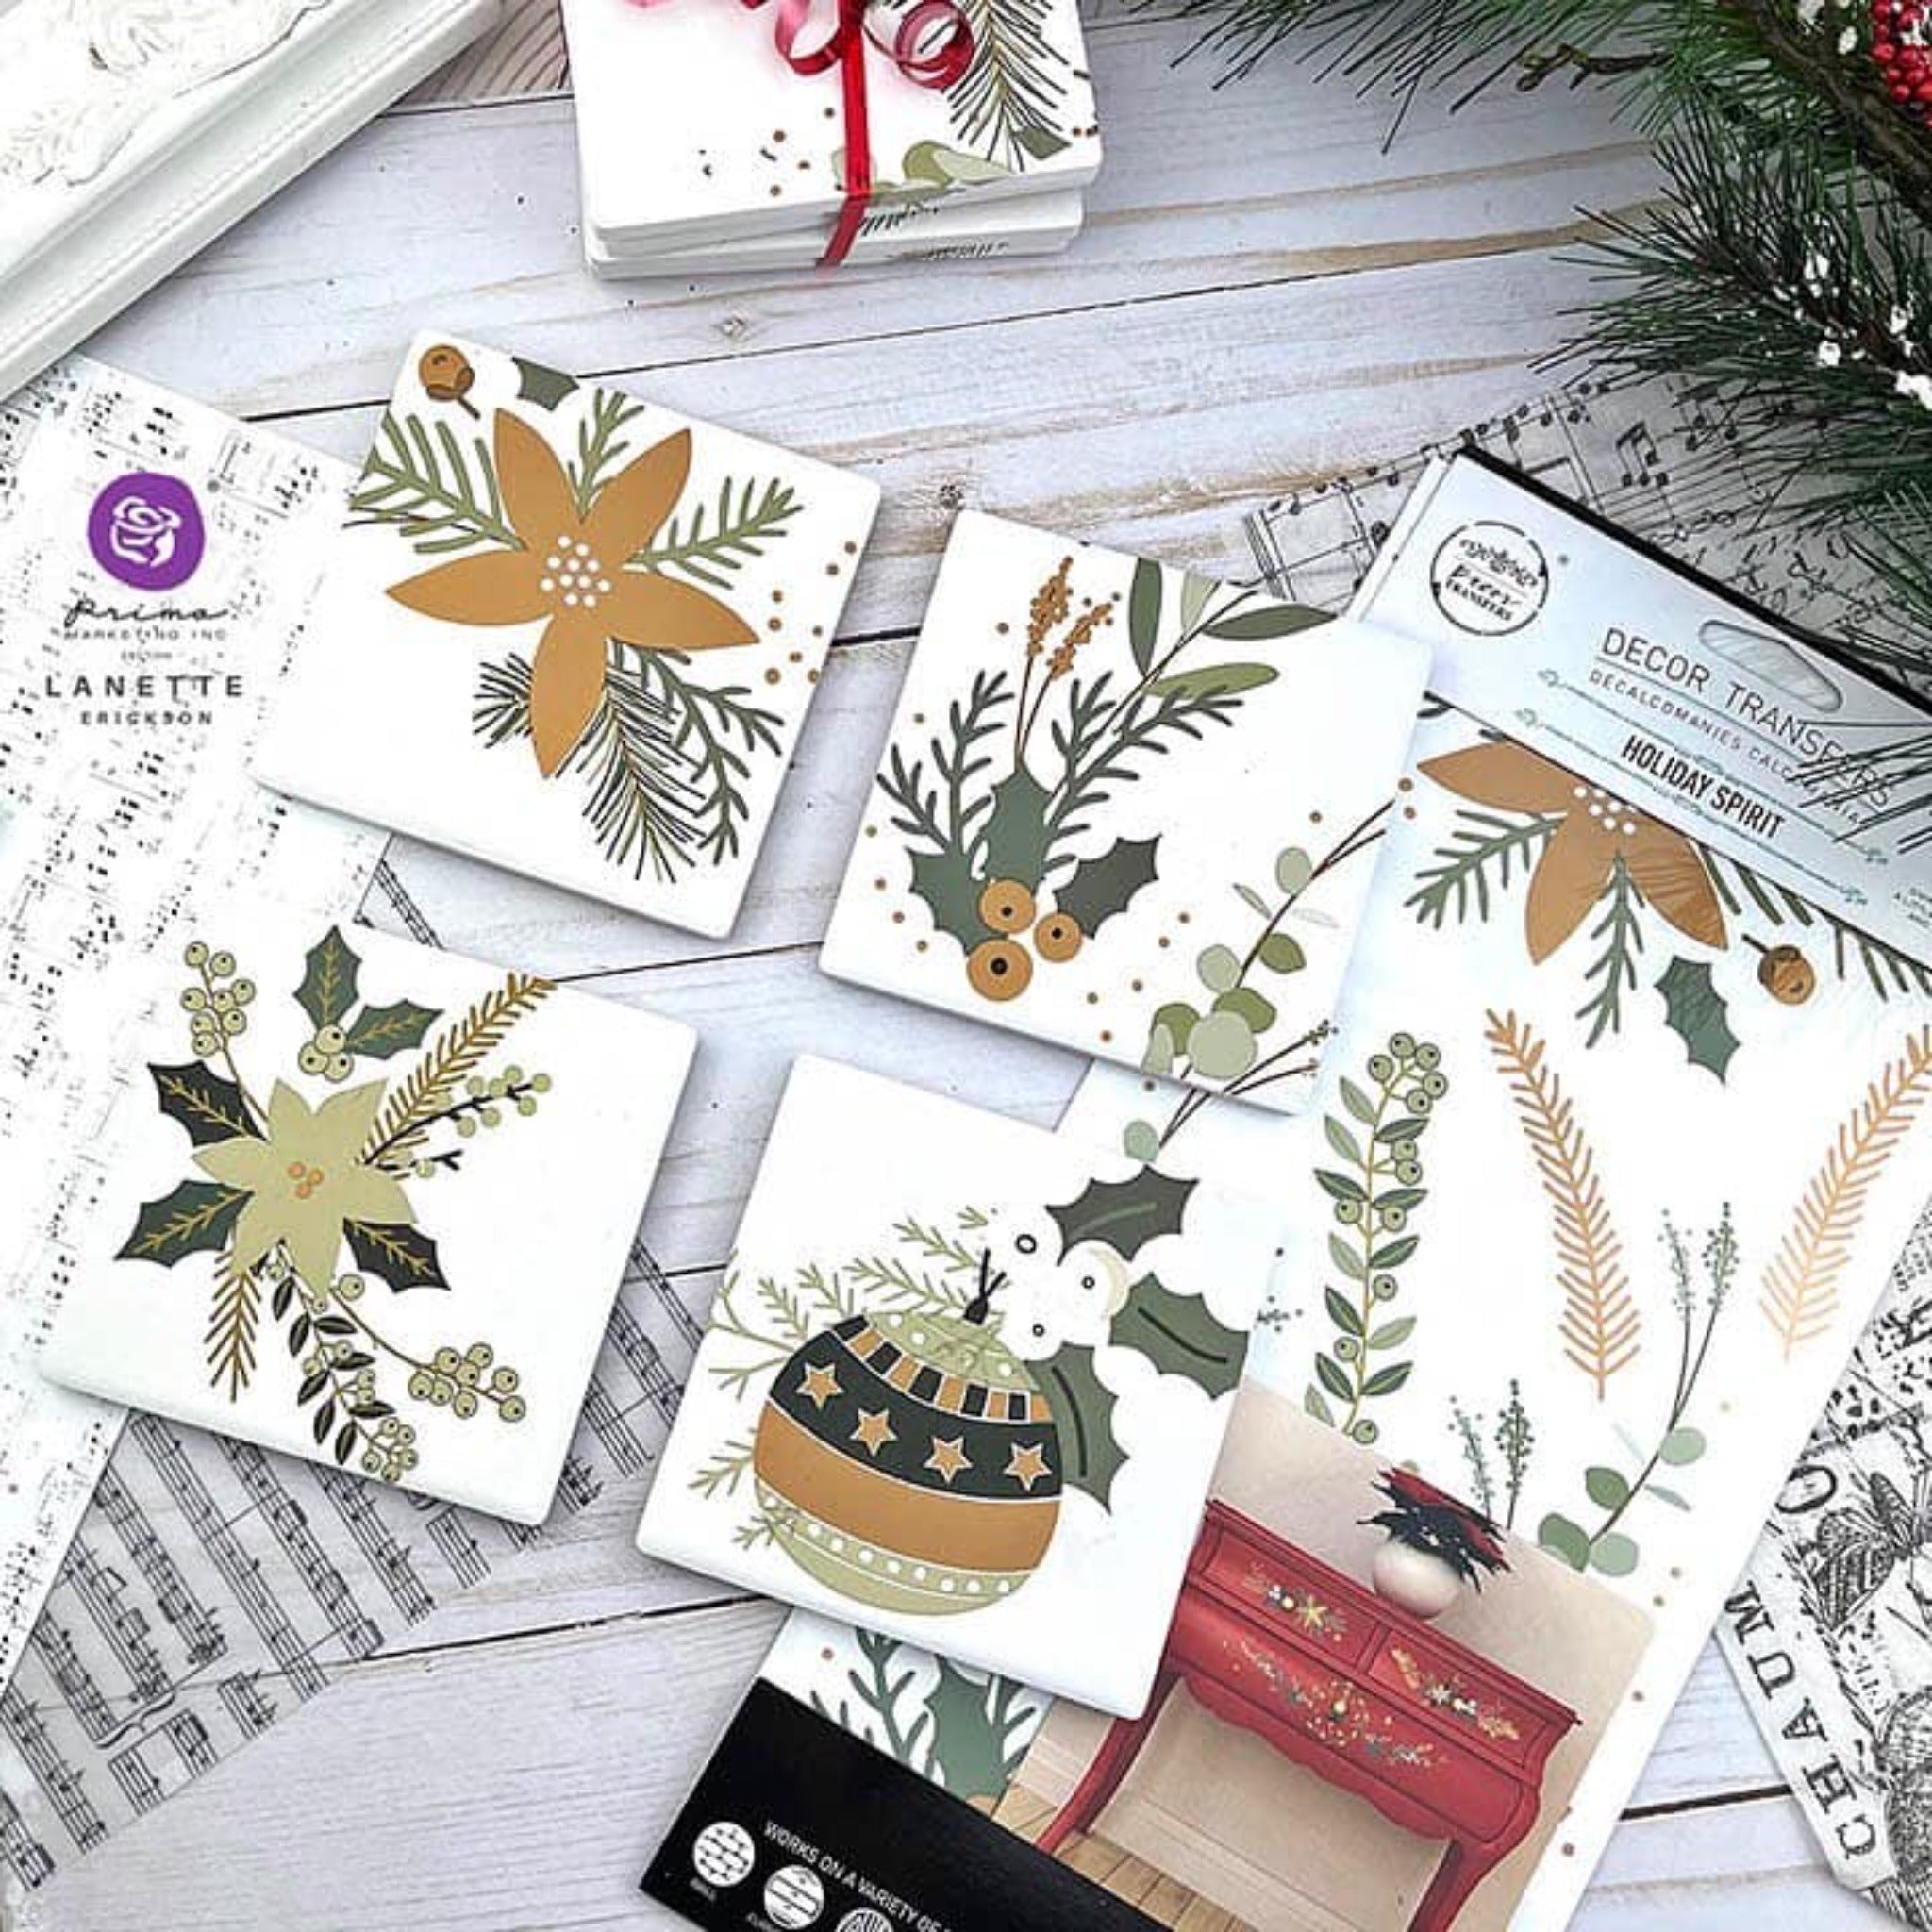 Four white tiles created by Lanette Erickson features pieces of ReDesign with Prima's Holiday Spirit small transfer on them. The package of the transfer are under the 2 right tiles.